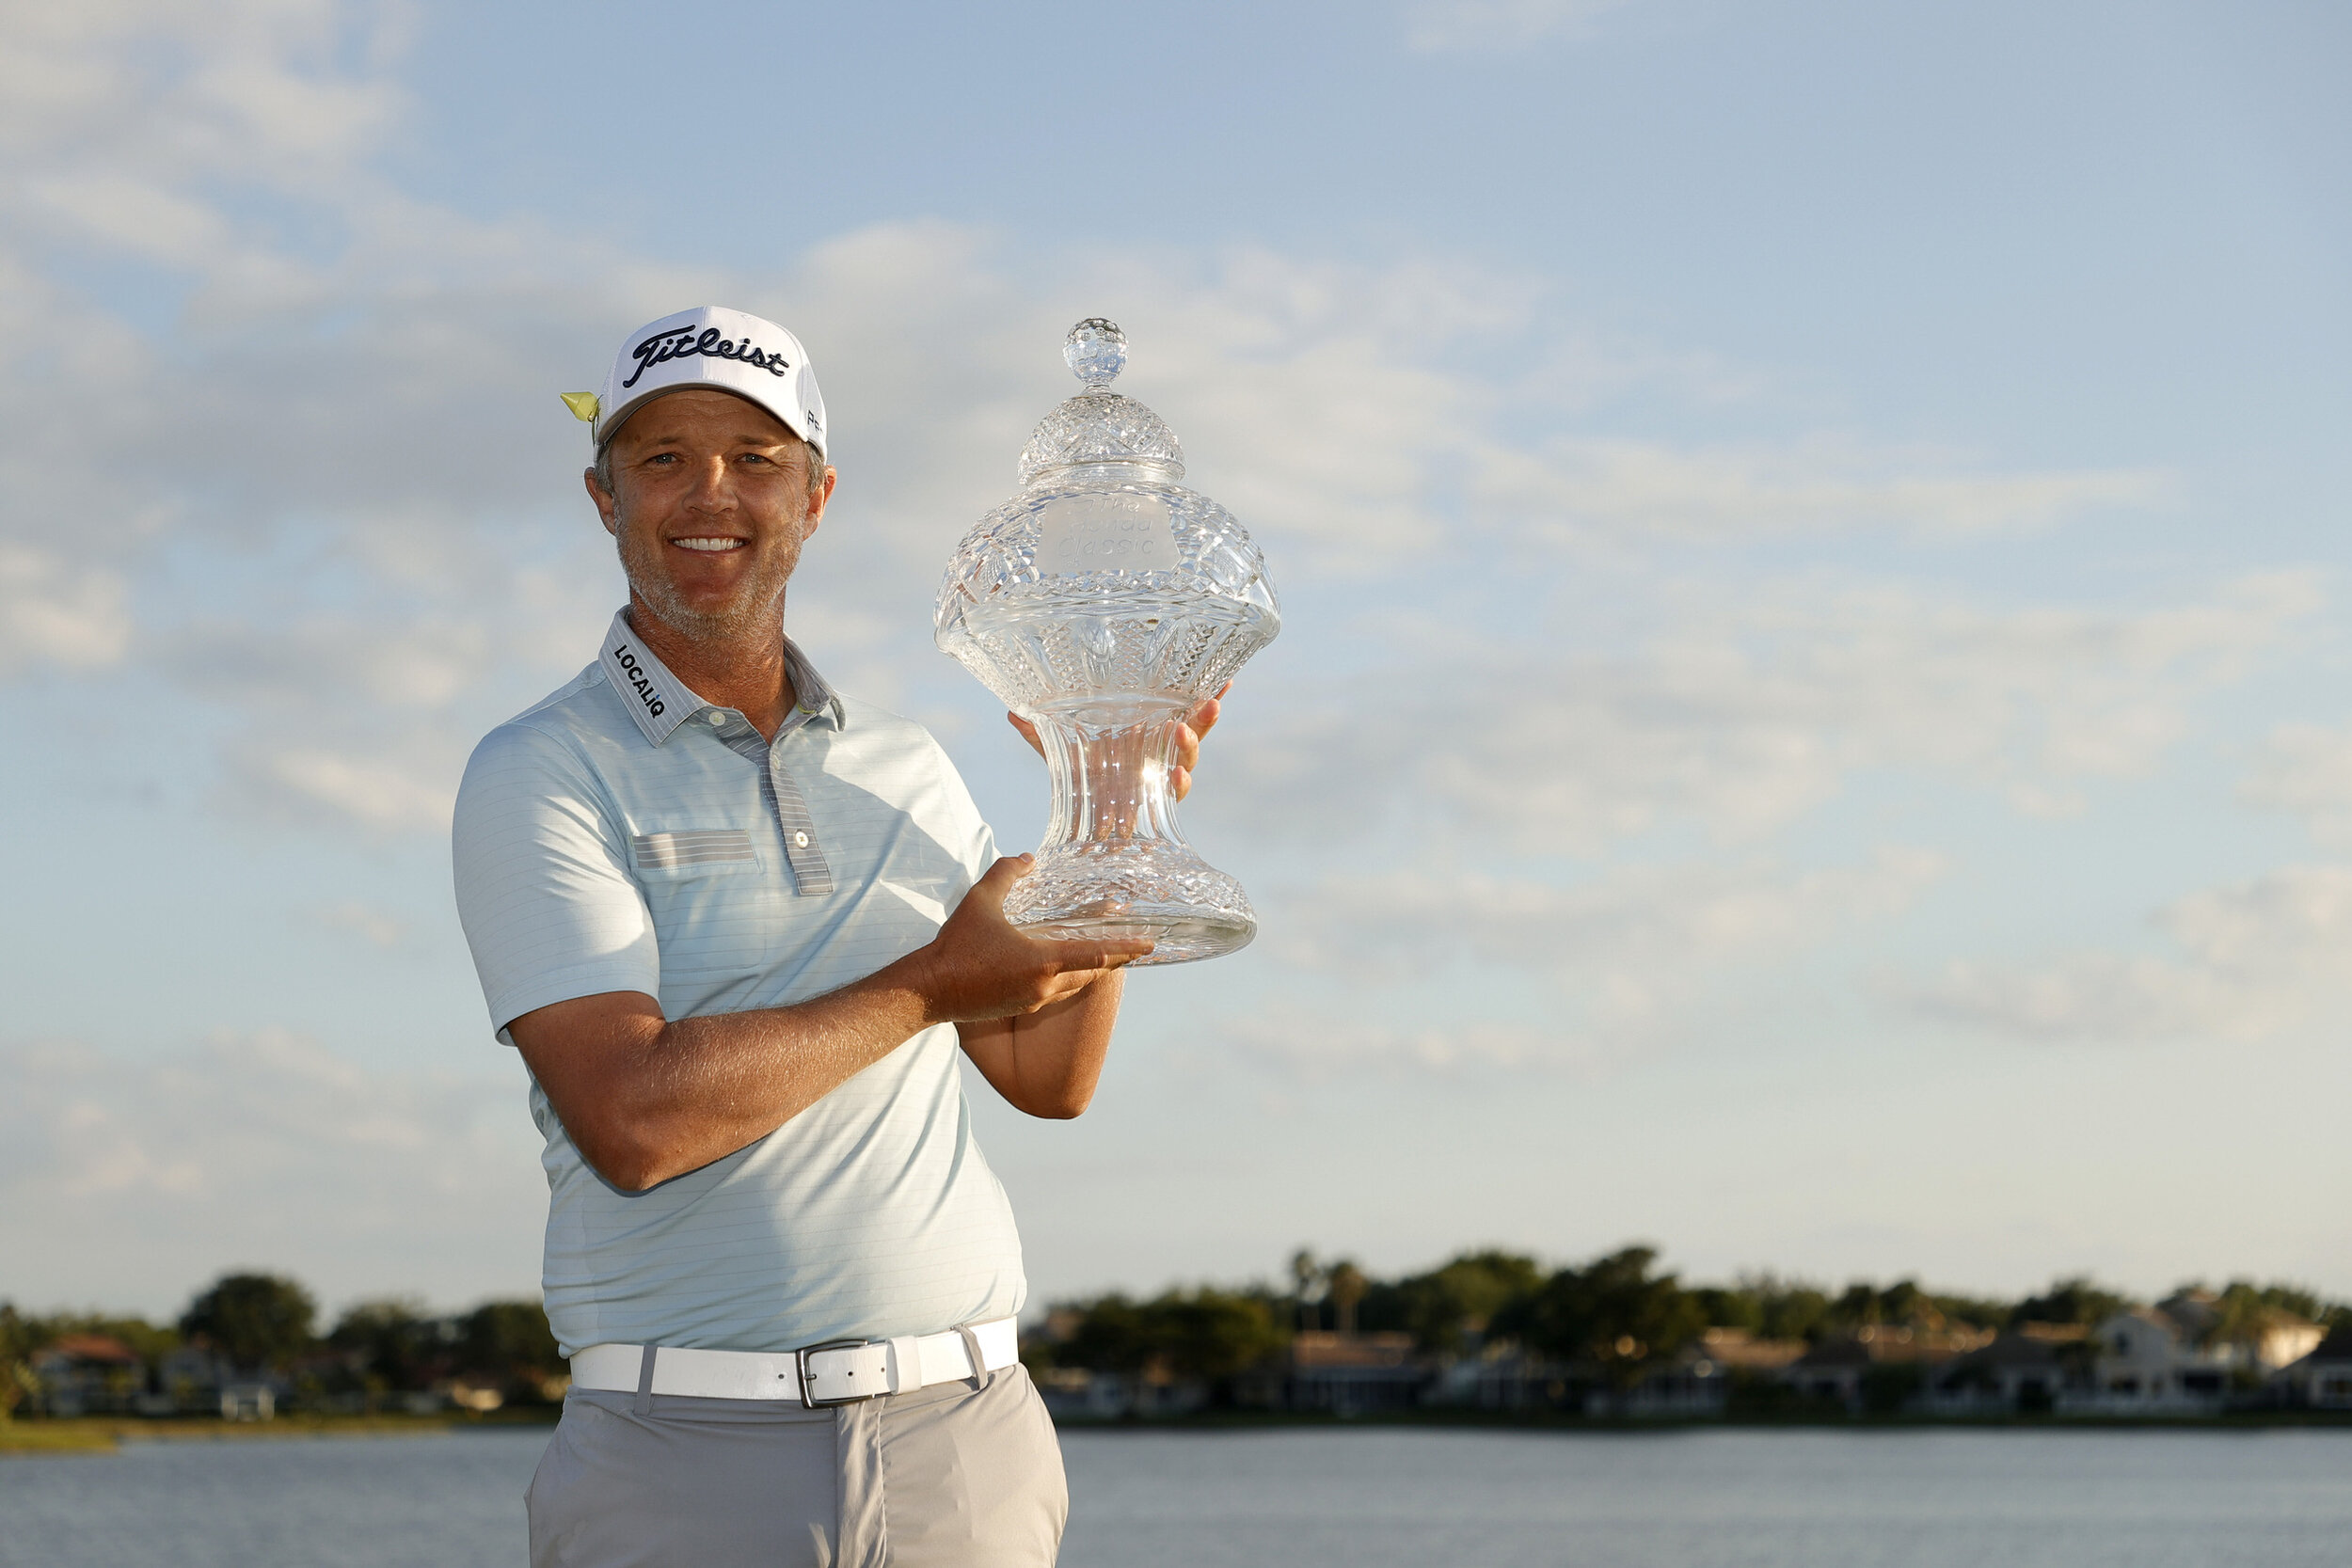  PALM BEACH GARDENS, FLORIDA - MARCH 21: Matt Jones of Australia celebrates with the trophy after winning during the final round of The Honda Classic at PGA National Champion course on March 21, 2021 in Palm Beach Gardens, Florida. (Photo by Jared C.